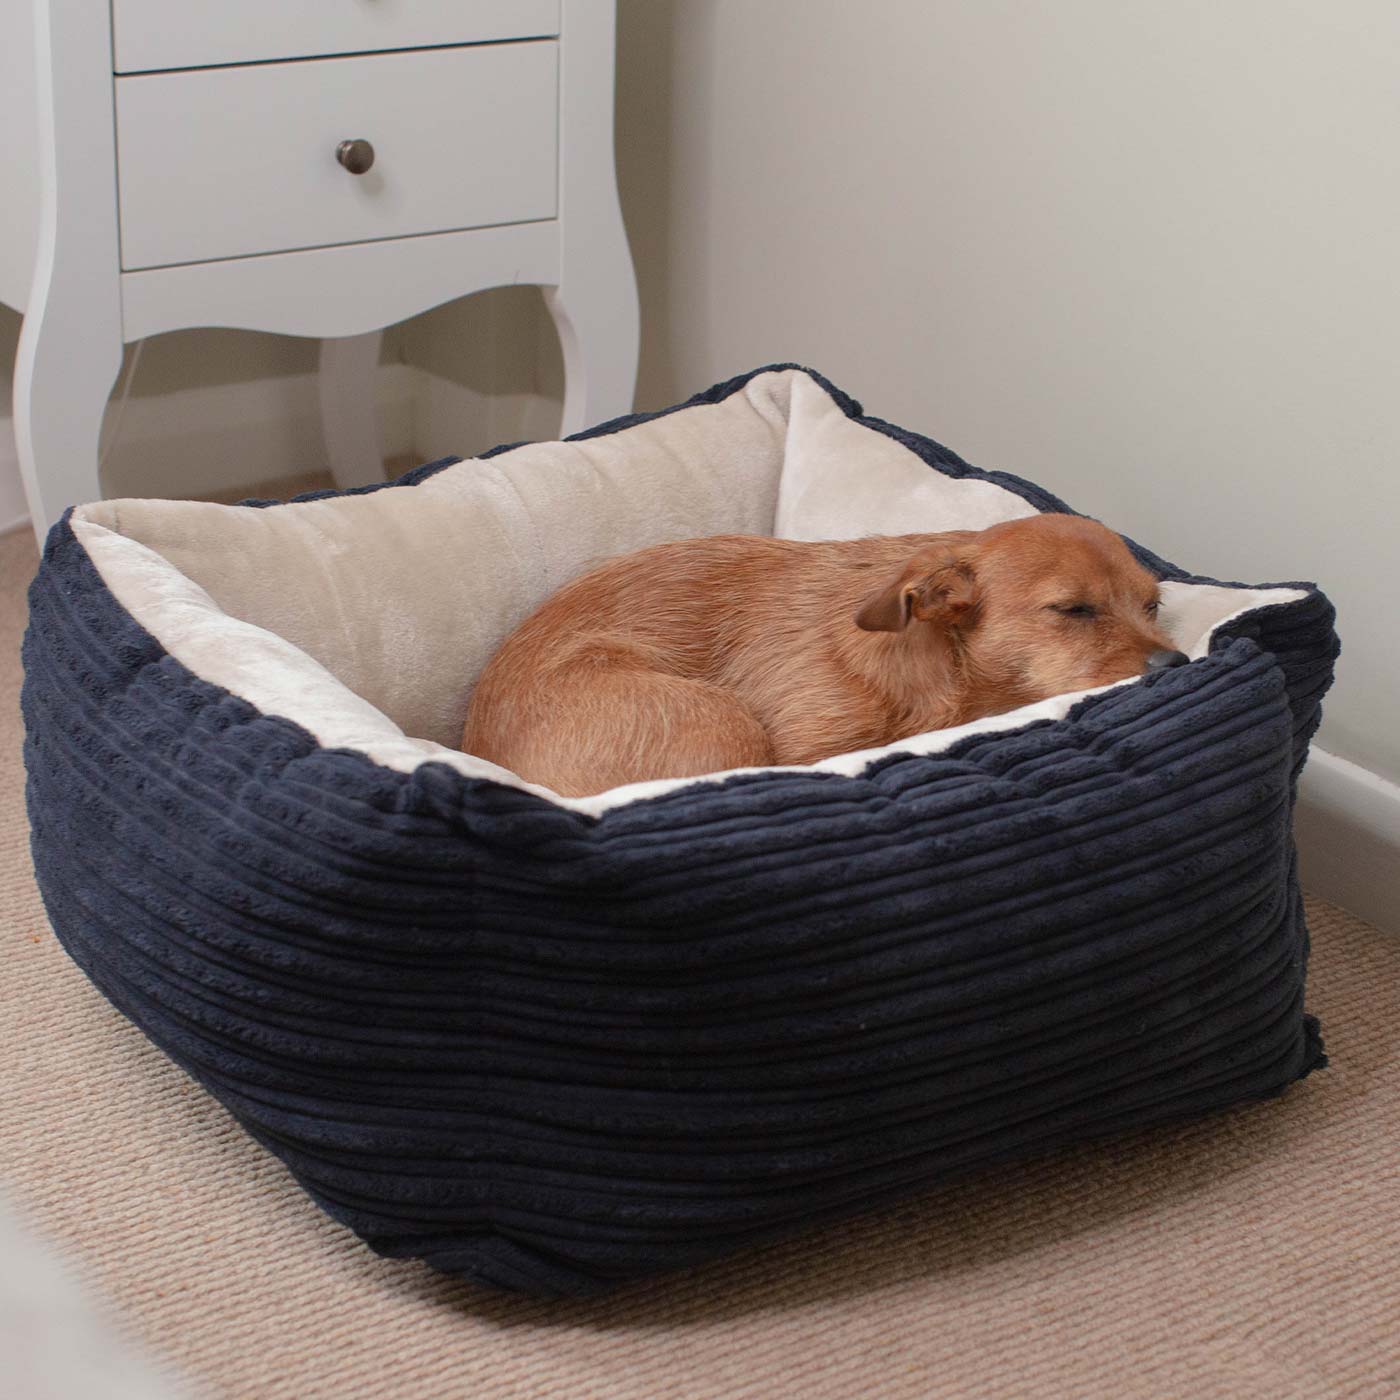 Super Soft, Plush Fabric Essentials Box Bed For Dogs, A Luxury Dog Bed Made Using Sherpa/Fleece To Bring The Perfect Pet Bed For The Ultimate Nap Time! Available Now at Lords & Labradors